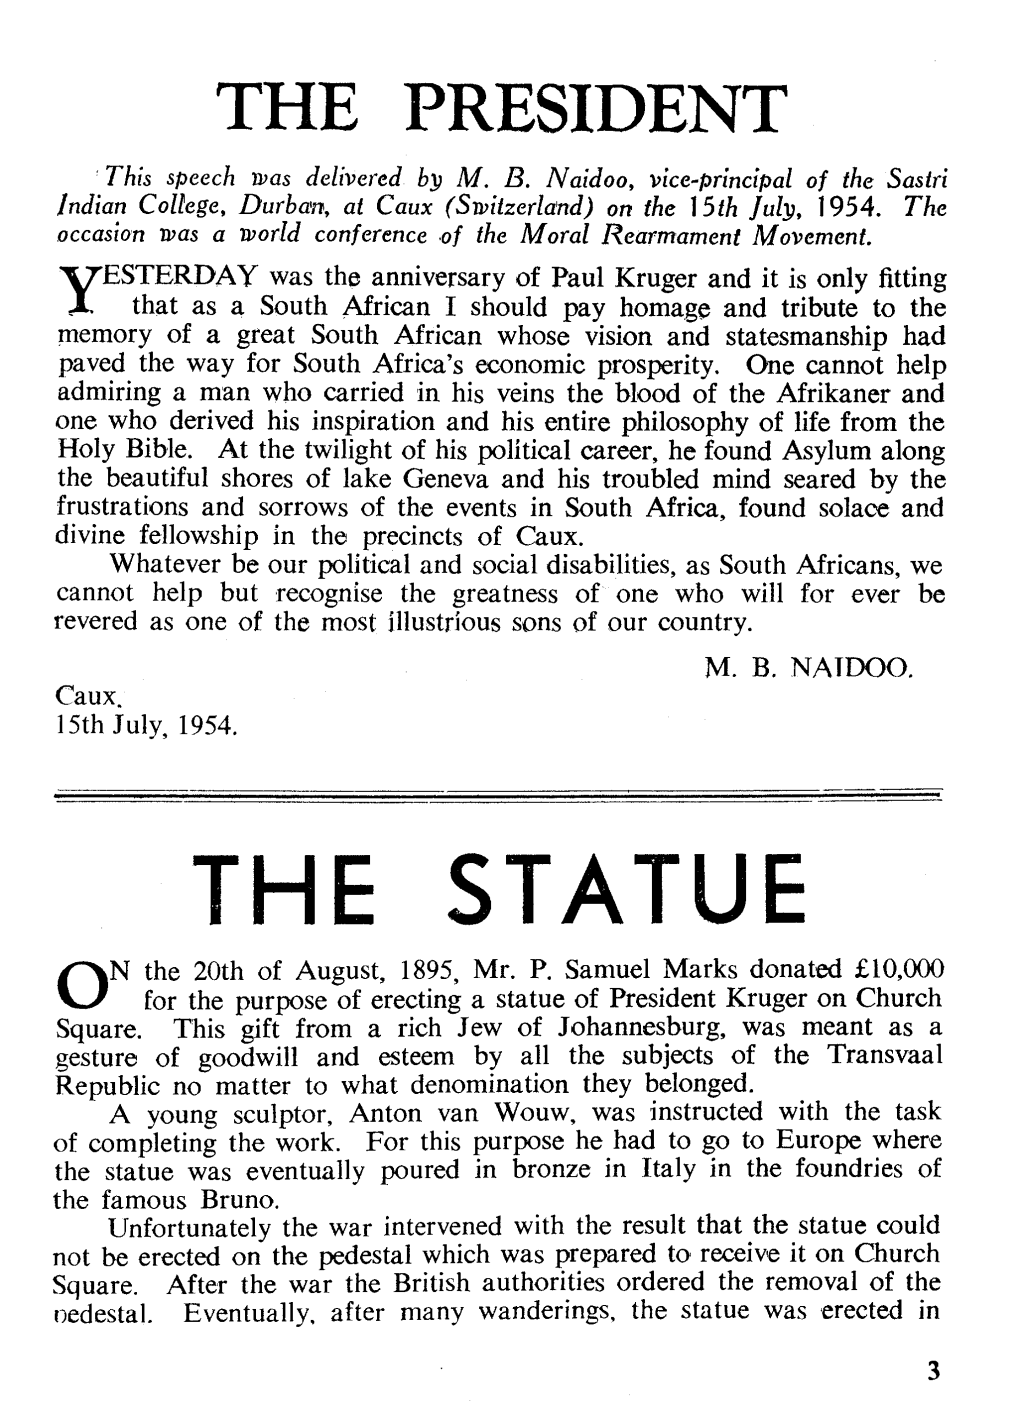 THE STATUE N the 20Th of August, 1895, Mr